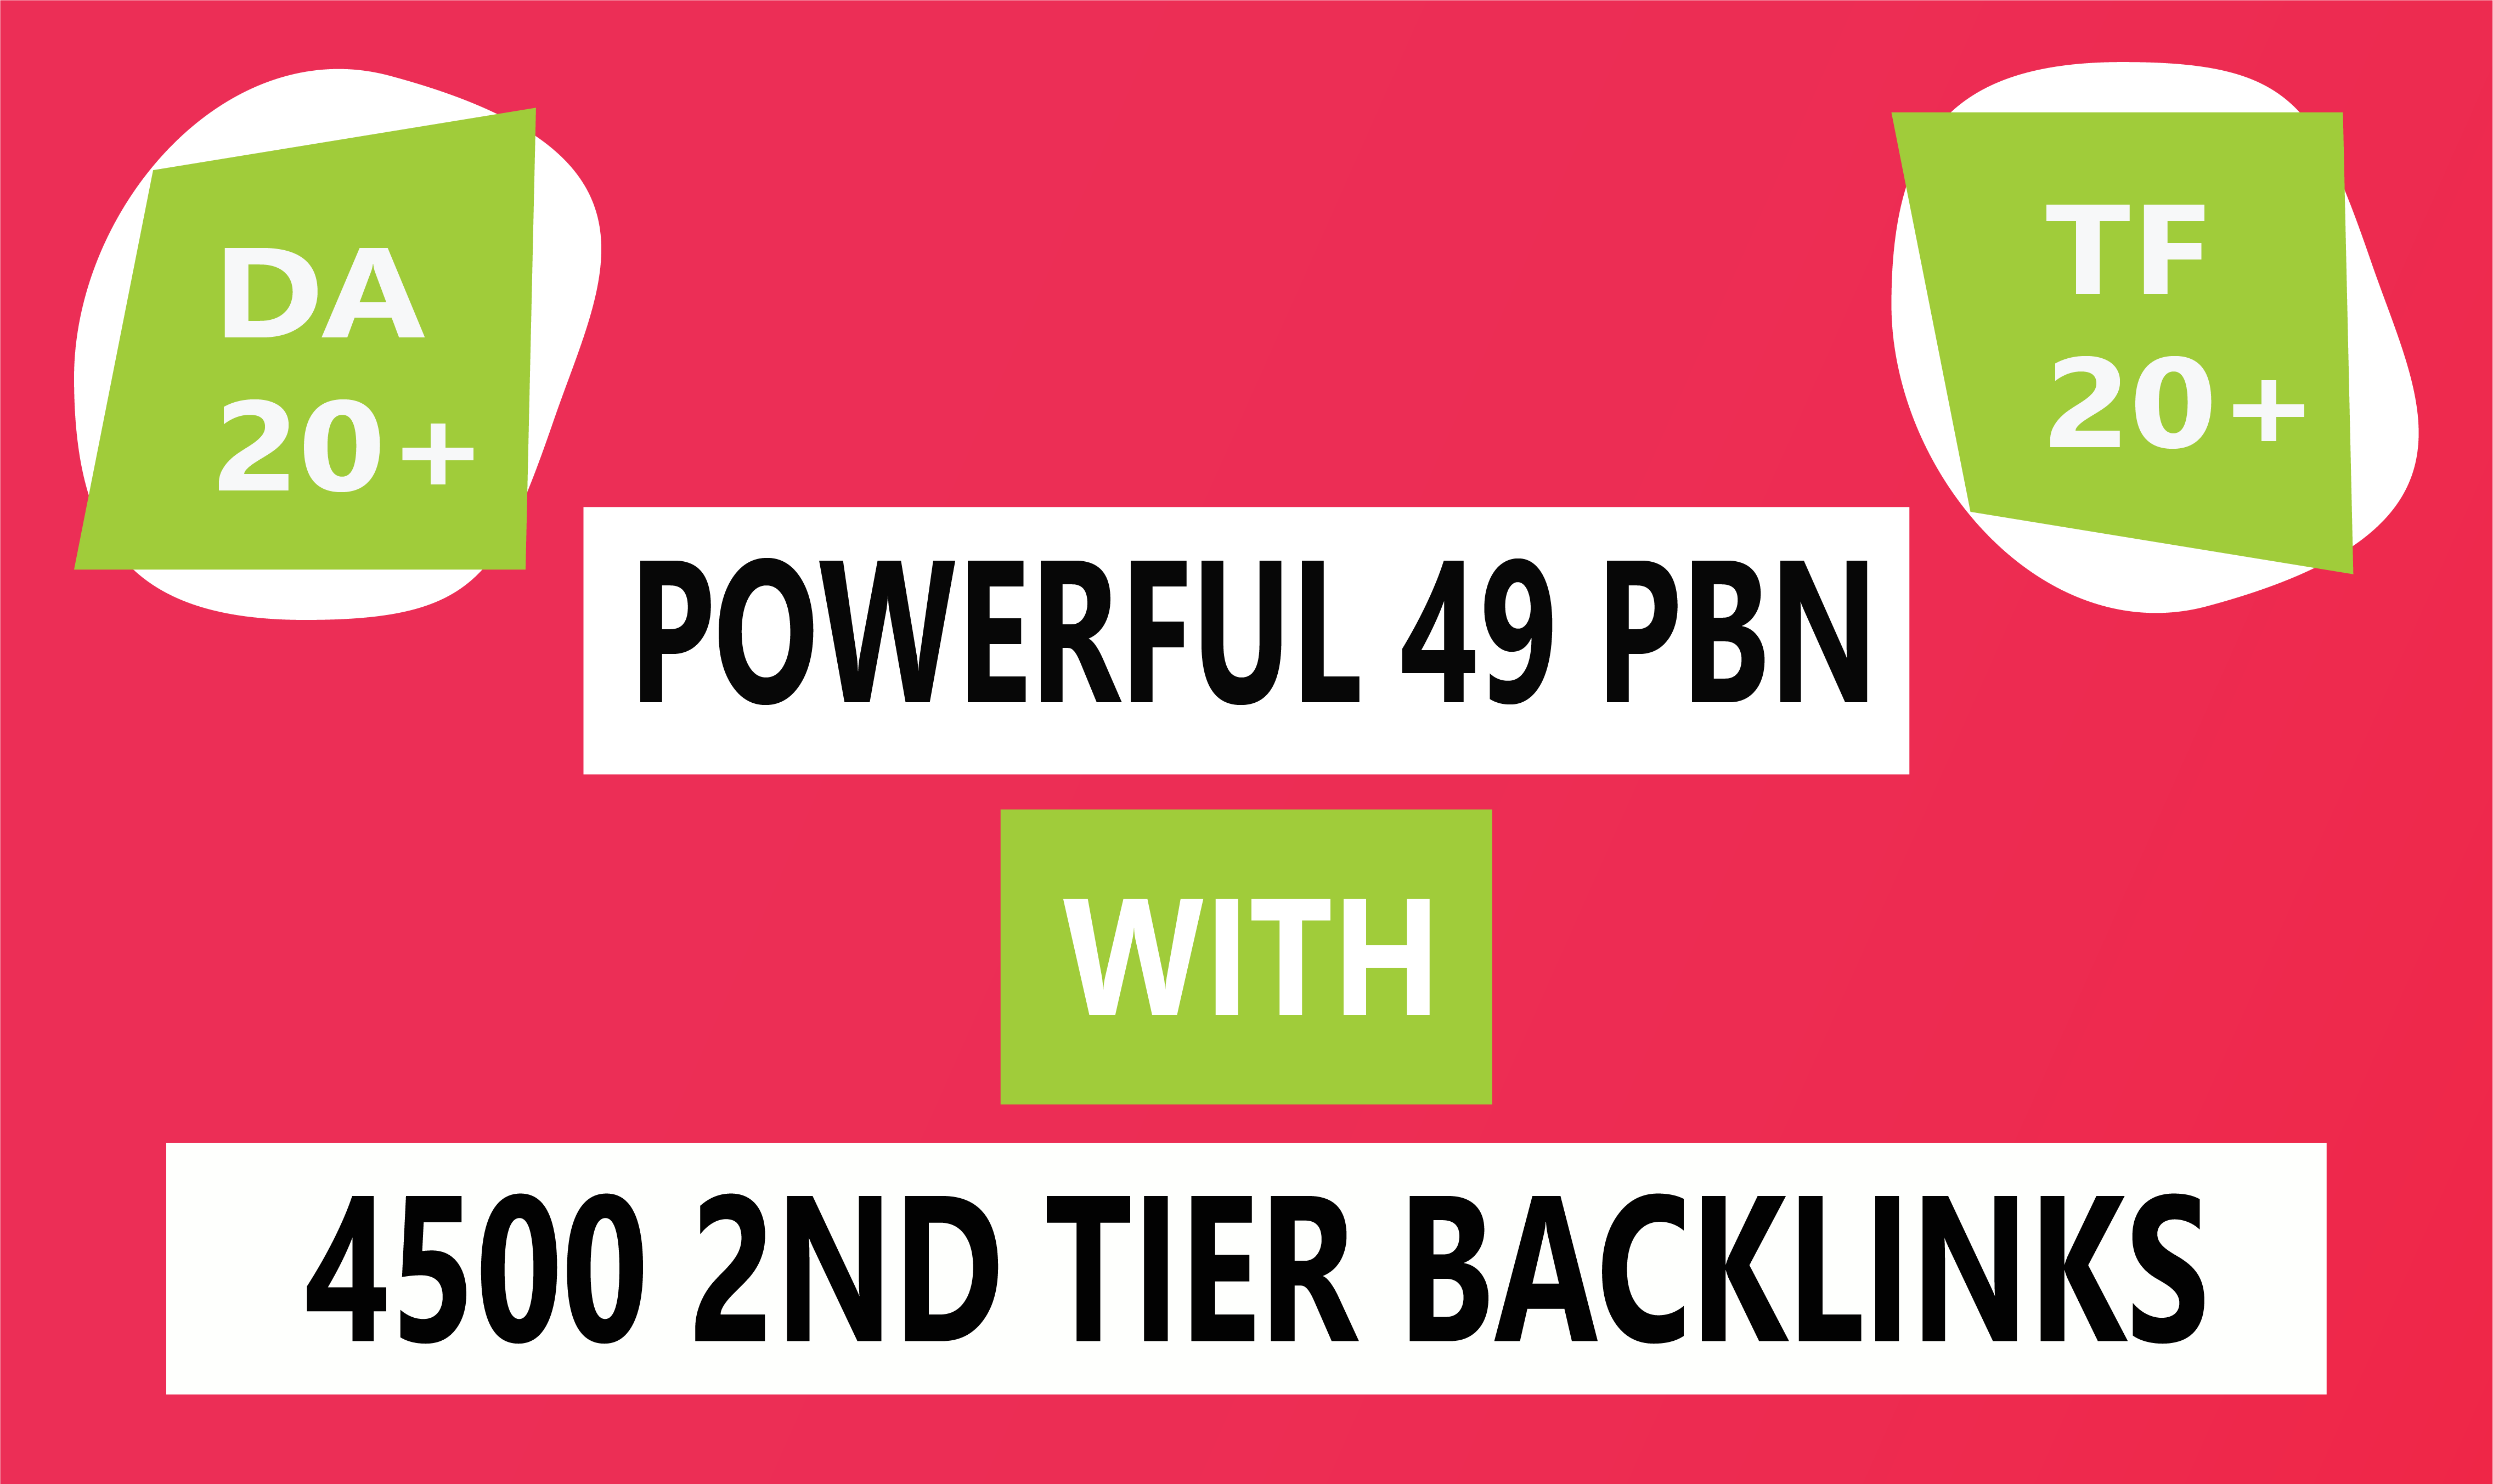 Powerful 49 Homepage Dofollow PBN With 4500 2nd Tier Contextual Backlinks